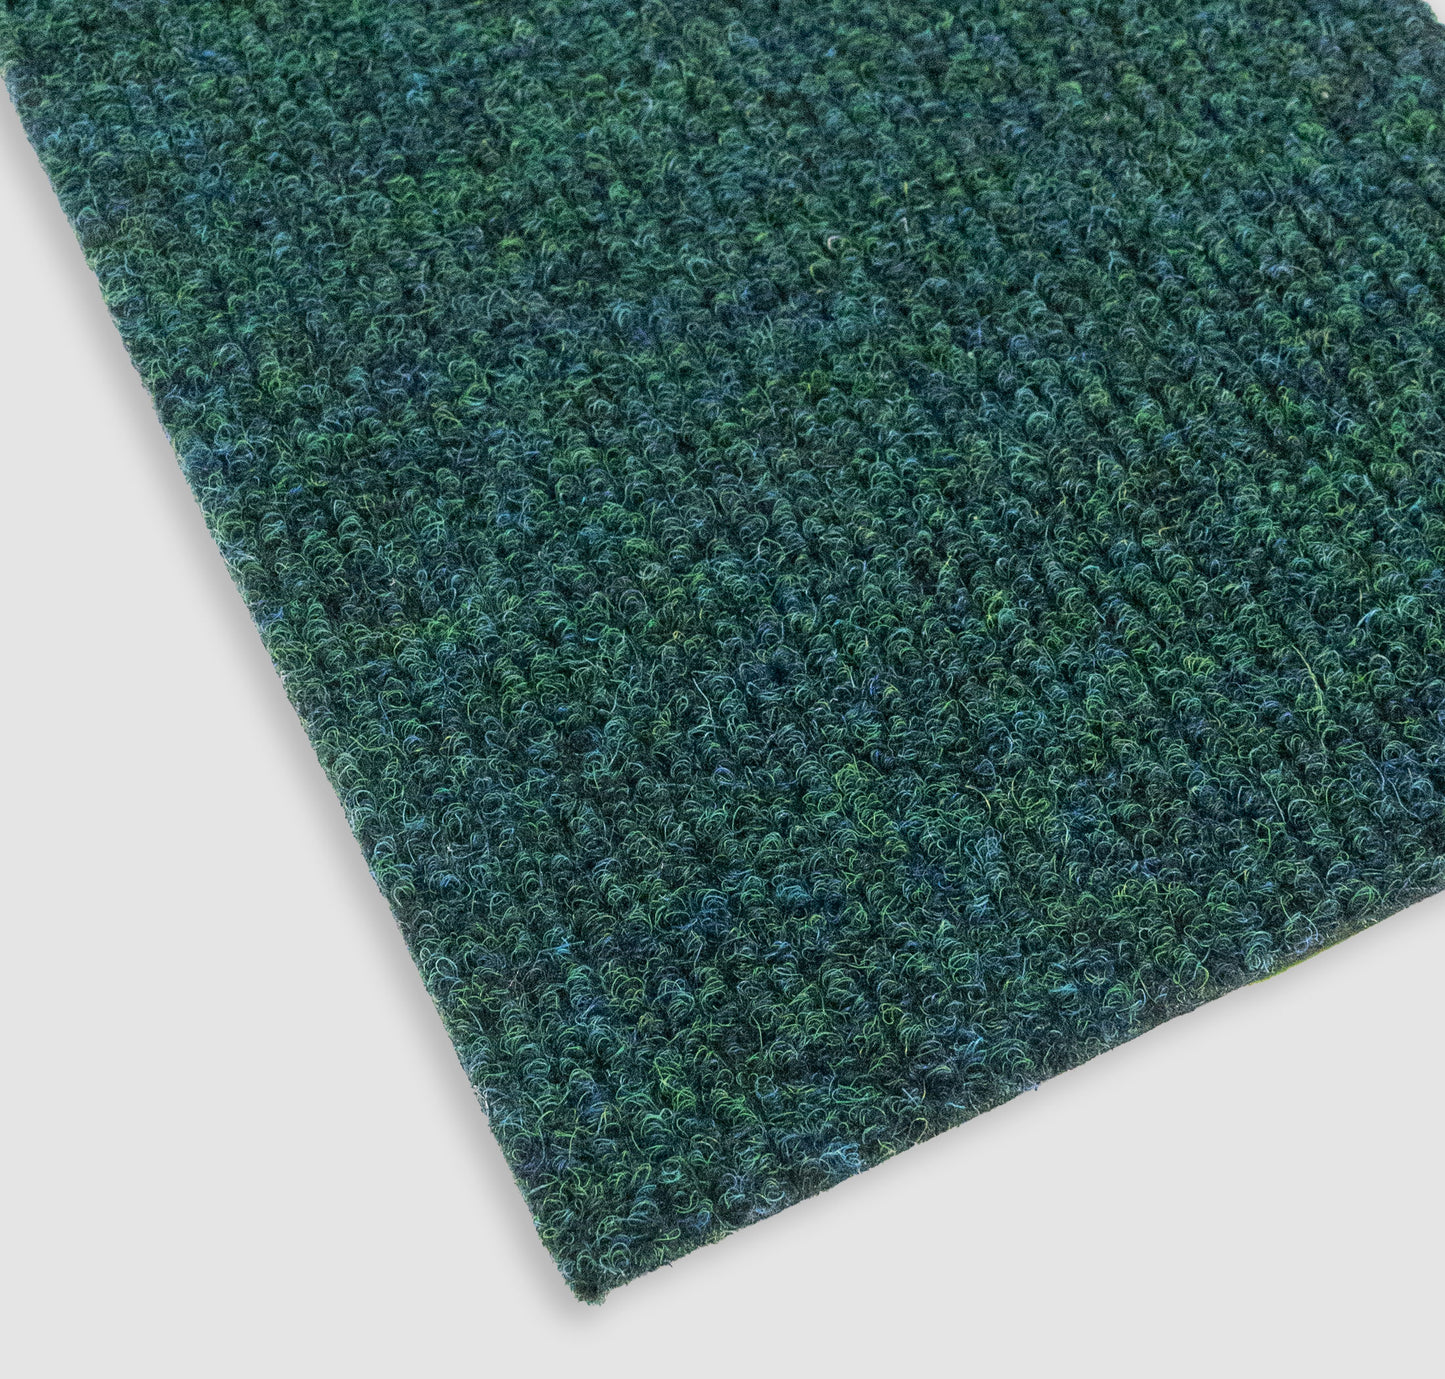 Bedford Rib Contract Sheet Carpet Collection